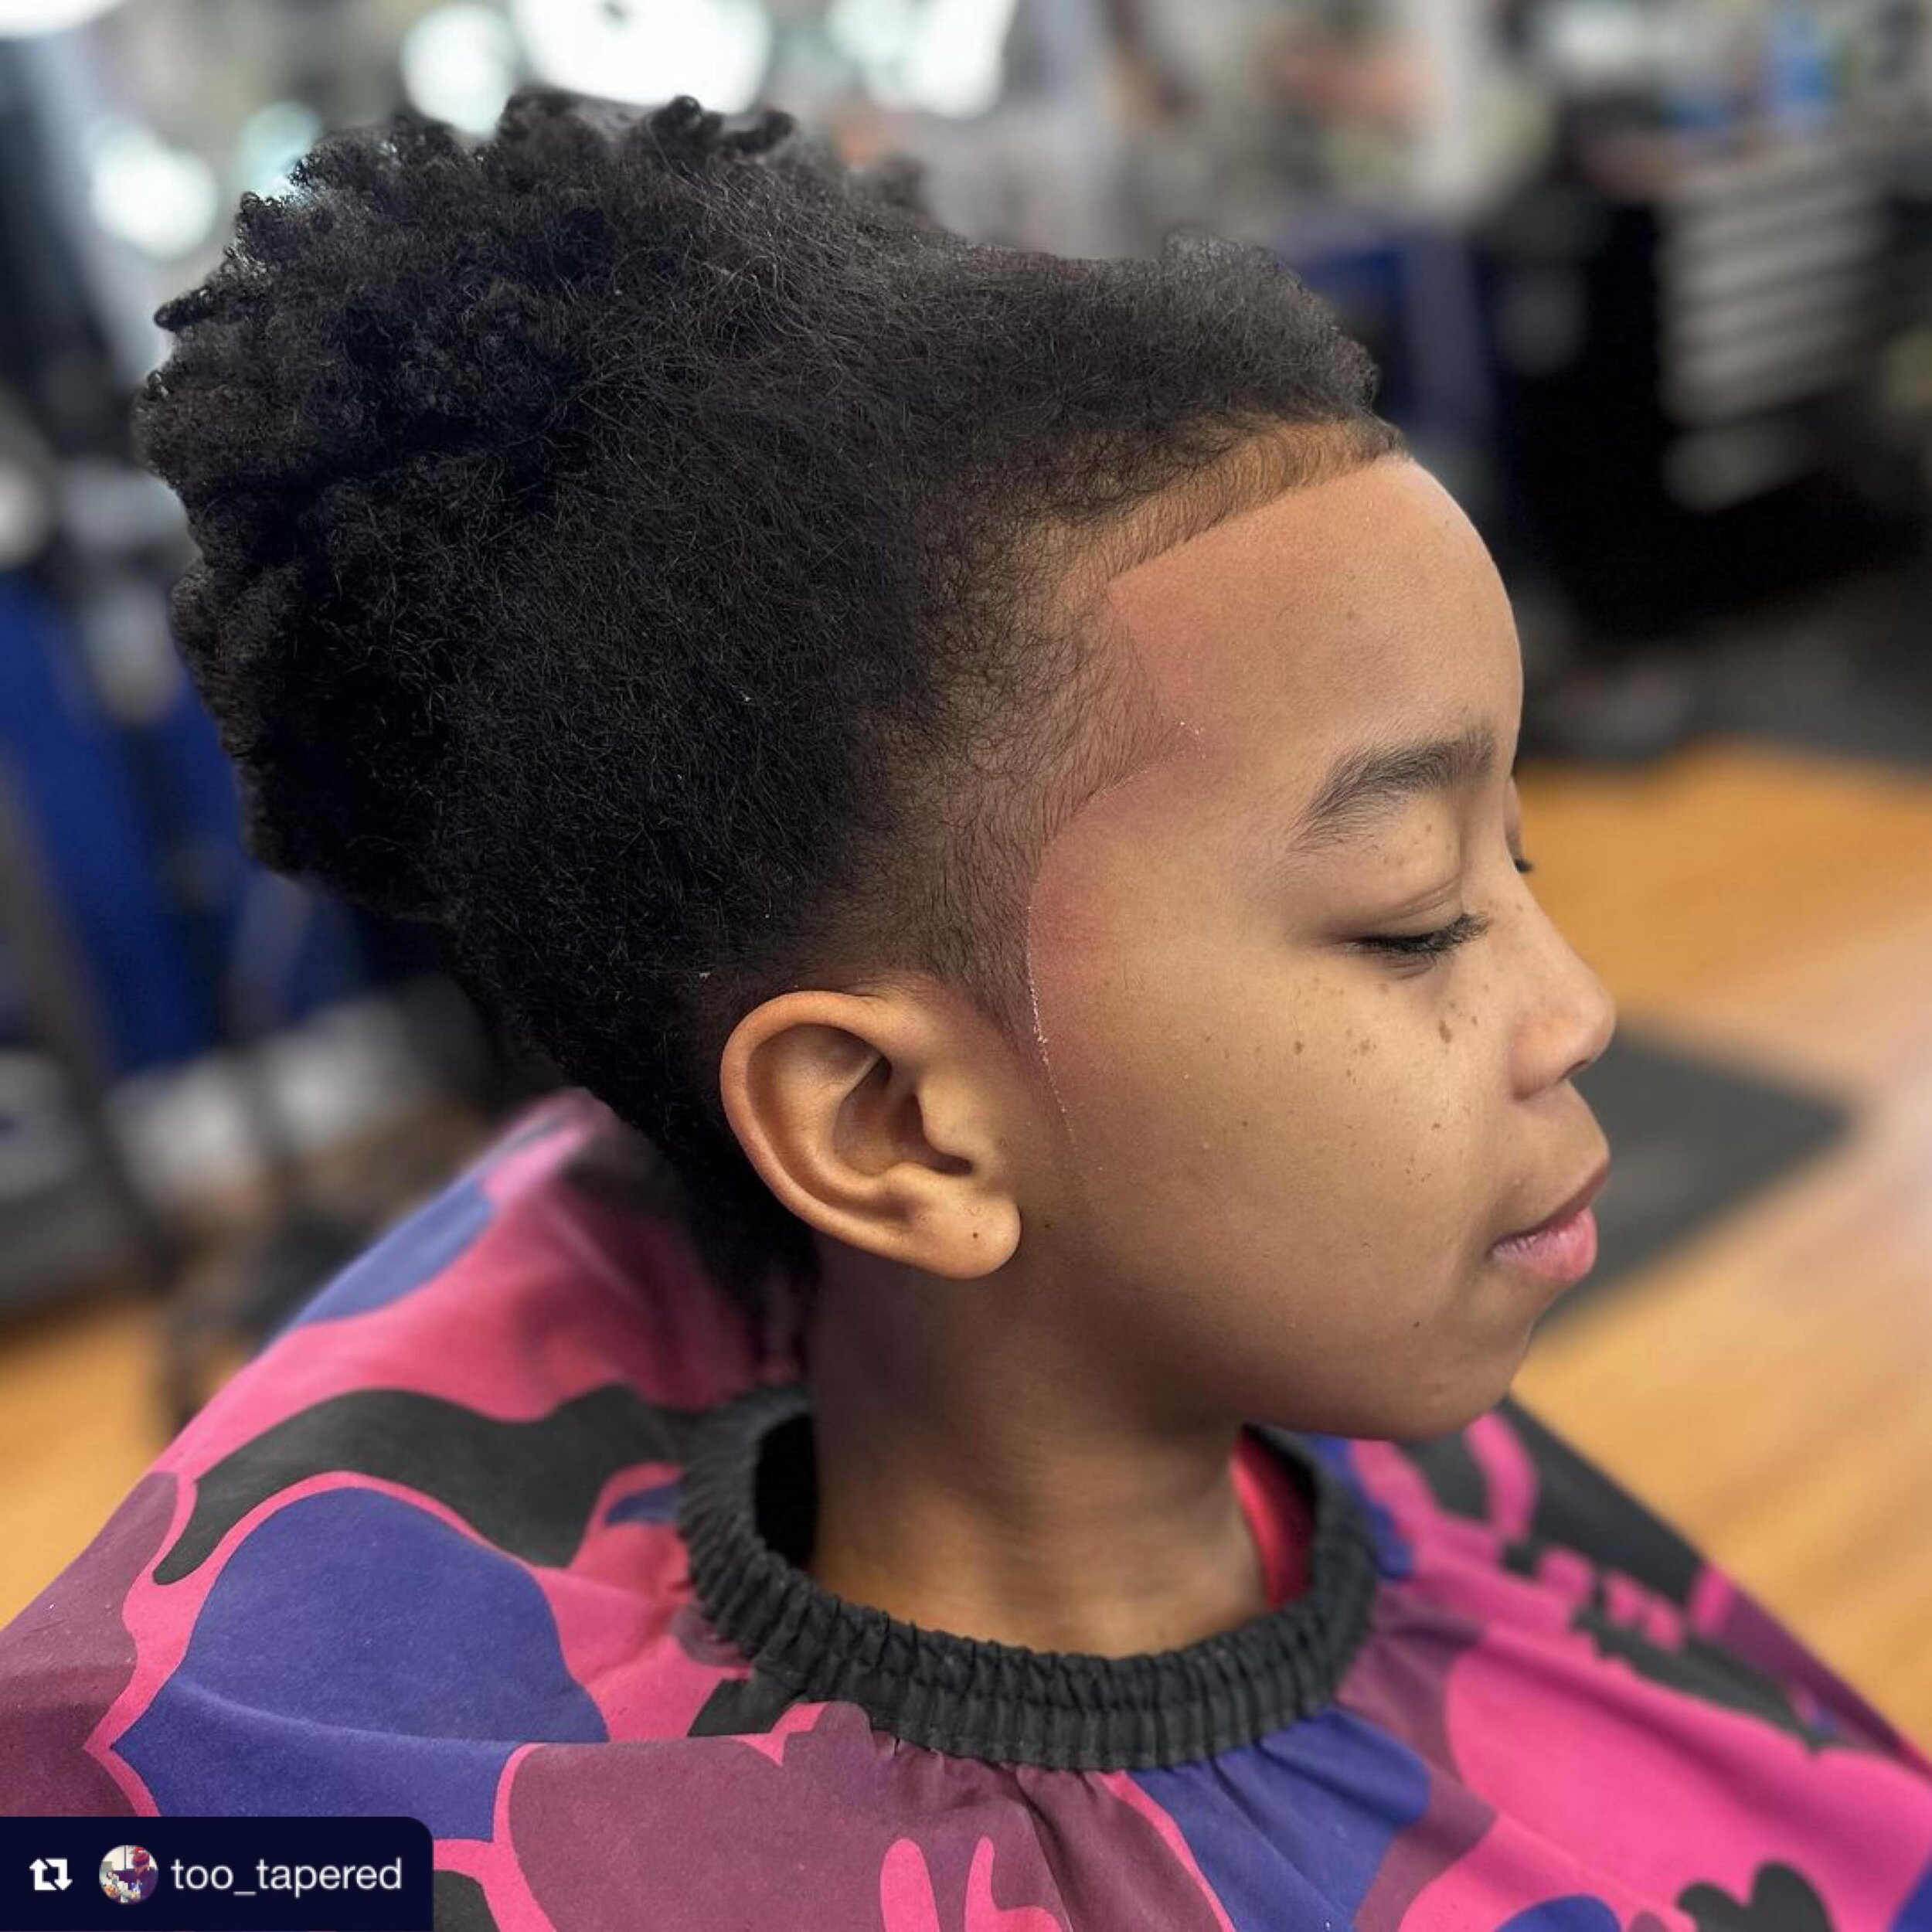 Repost from @too_tapered
&bull;
&ldquo;Too_tapered&rdquo; Book your appointments. #tootapered #natural #blendz401💈#oceanstatebarber #osbahaircuts #barbershopconnect #barbershop #barber #iphone #iphonepics #taper #beard #barbersarehiphop #curlsponge 